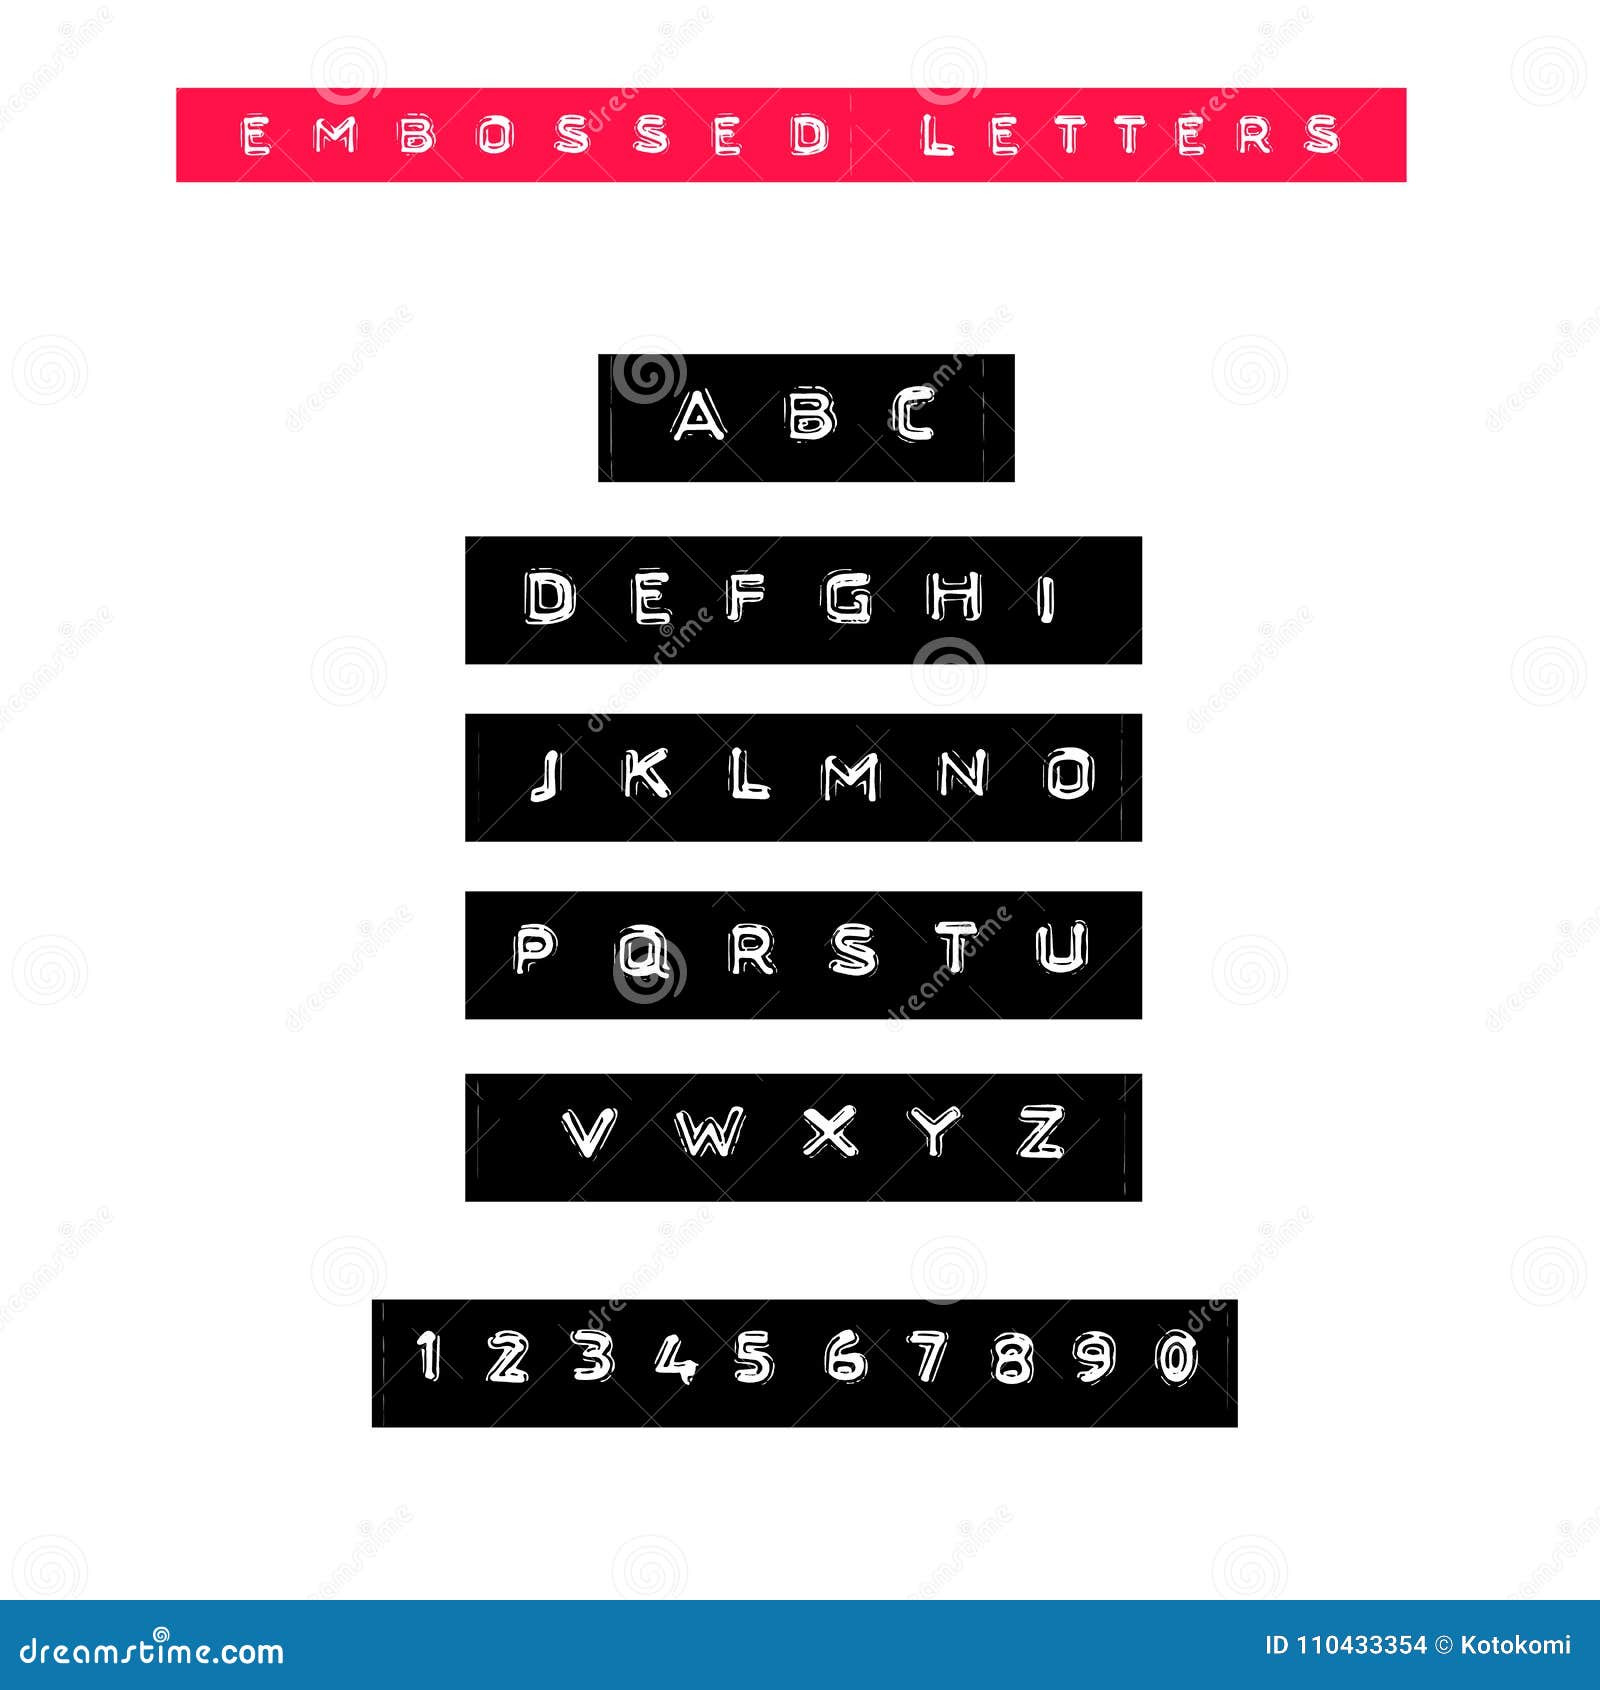 Embossed Letters Tape Font. Vintage Adhesive Label Type. Vector Alphabet.  Stock Vector - Illustration of hipster, embossed: 110433354